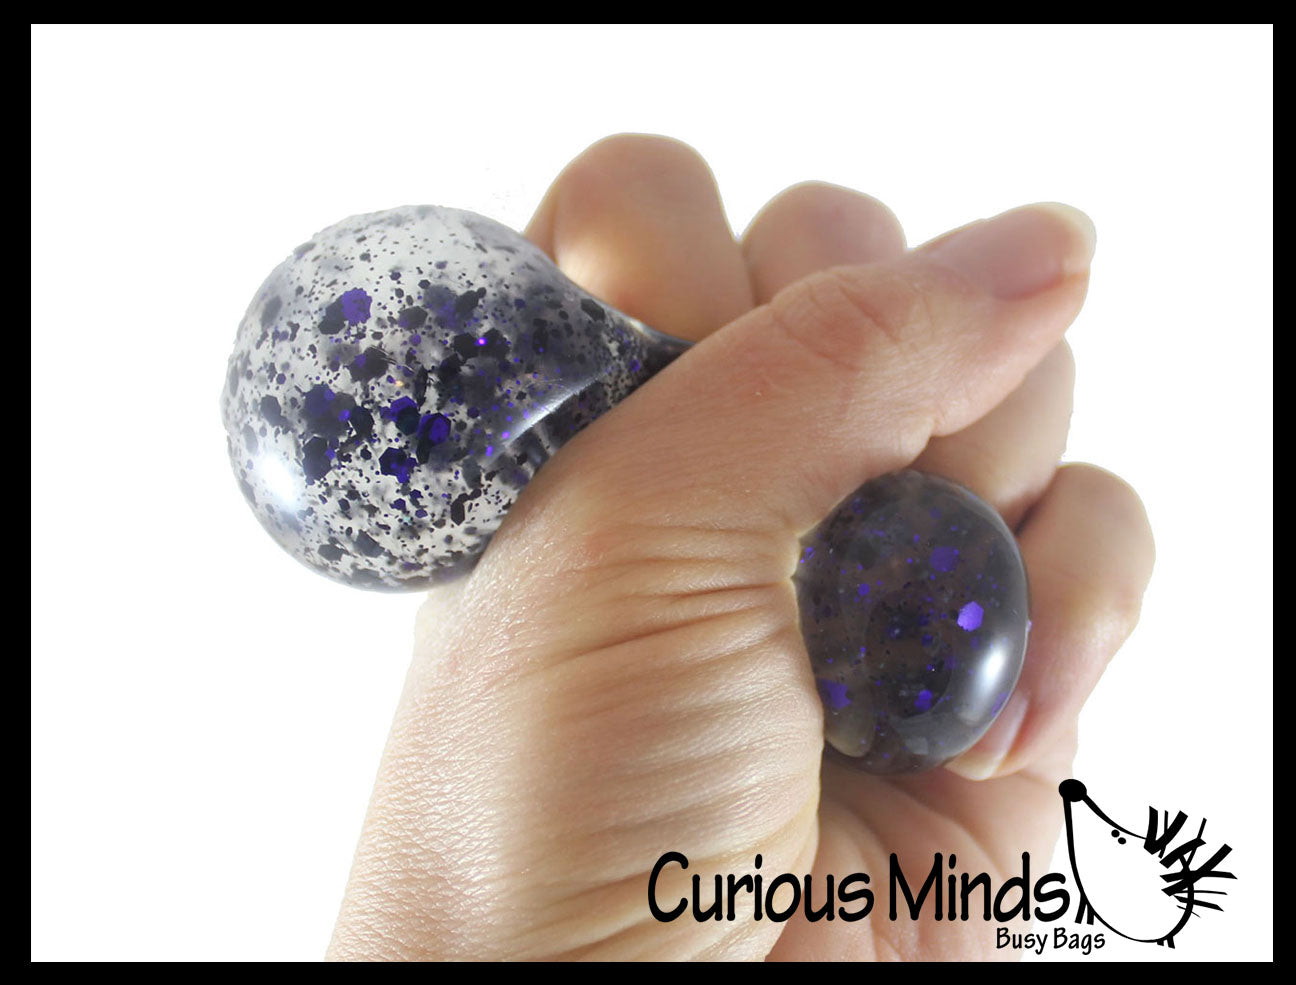 Small Metallic with Shiny Iridescent Glitter Thick Gel-Filled Squeeze Stress Balls  -  Sensory, Stress, Fidget Toy